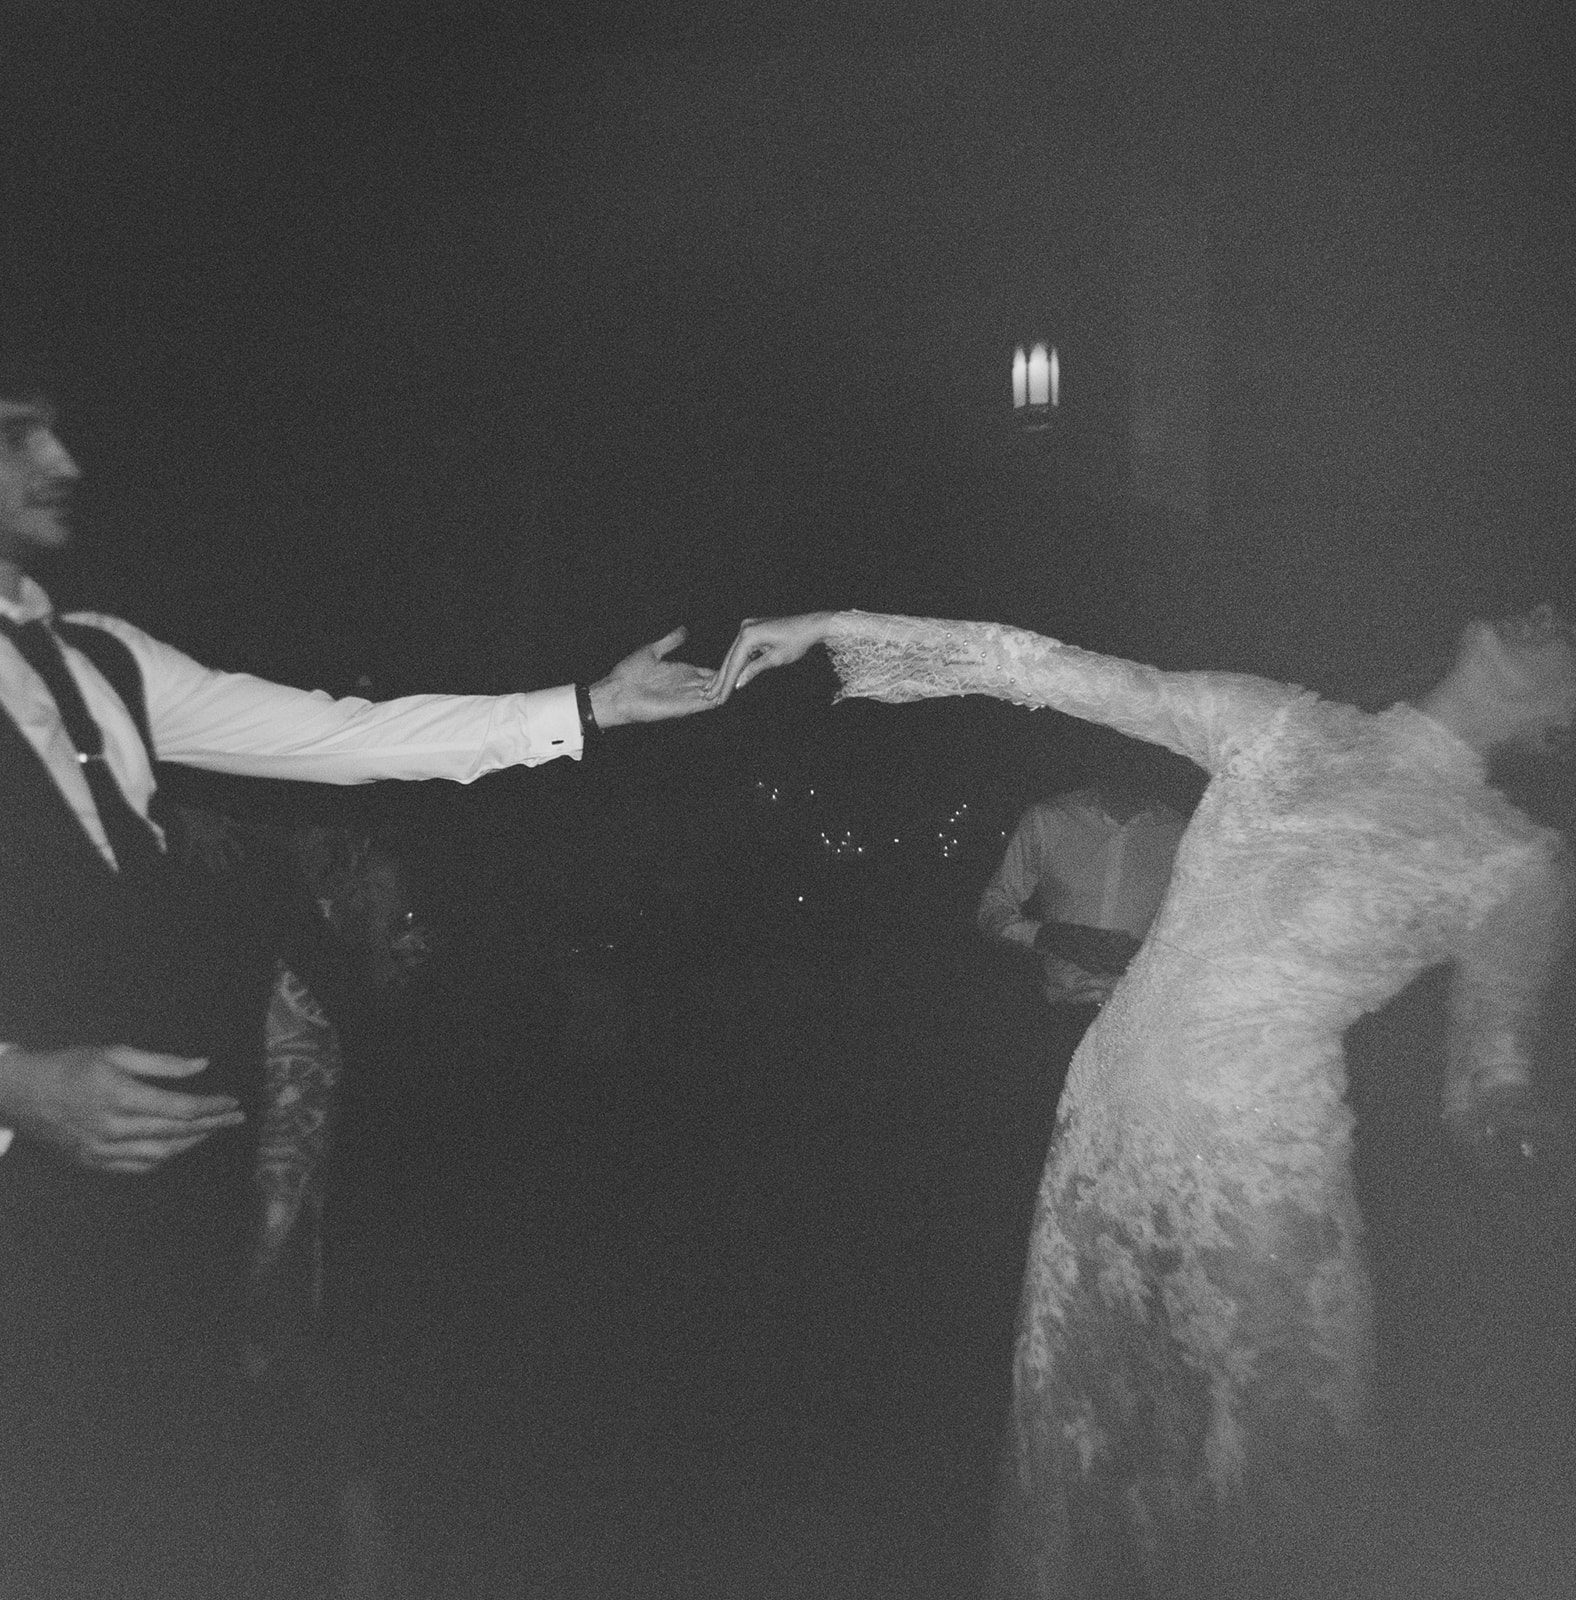 Vintage-inspired embrace on Ilford Delta 3200 film with captivating grain